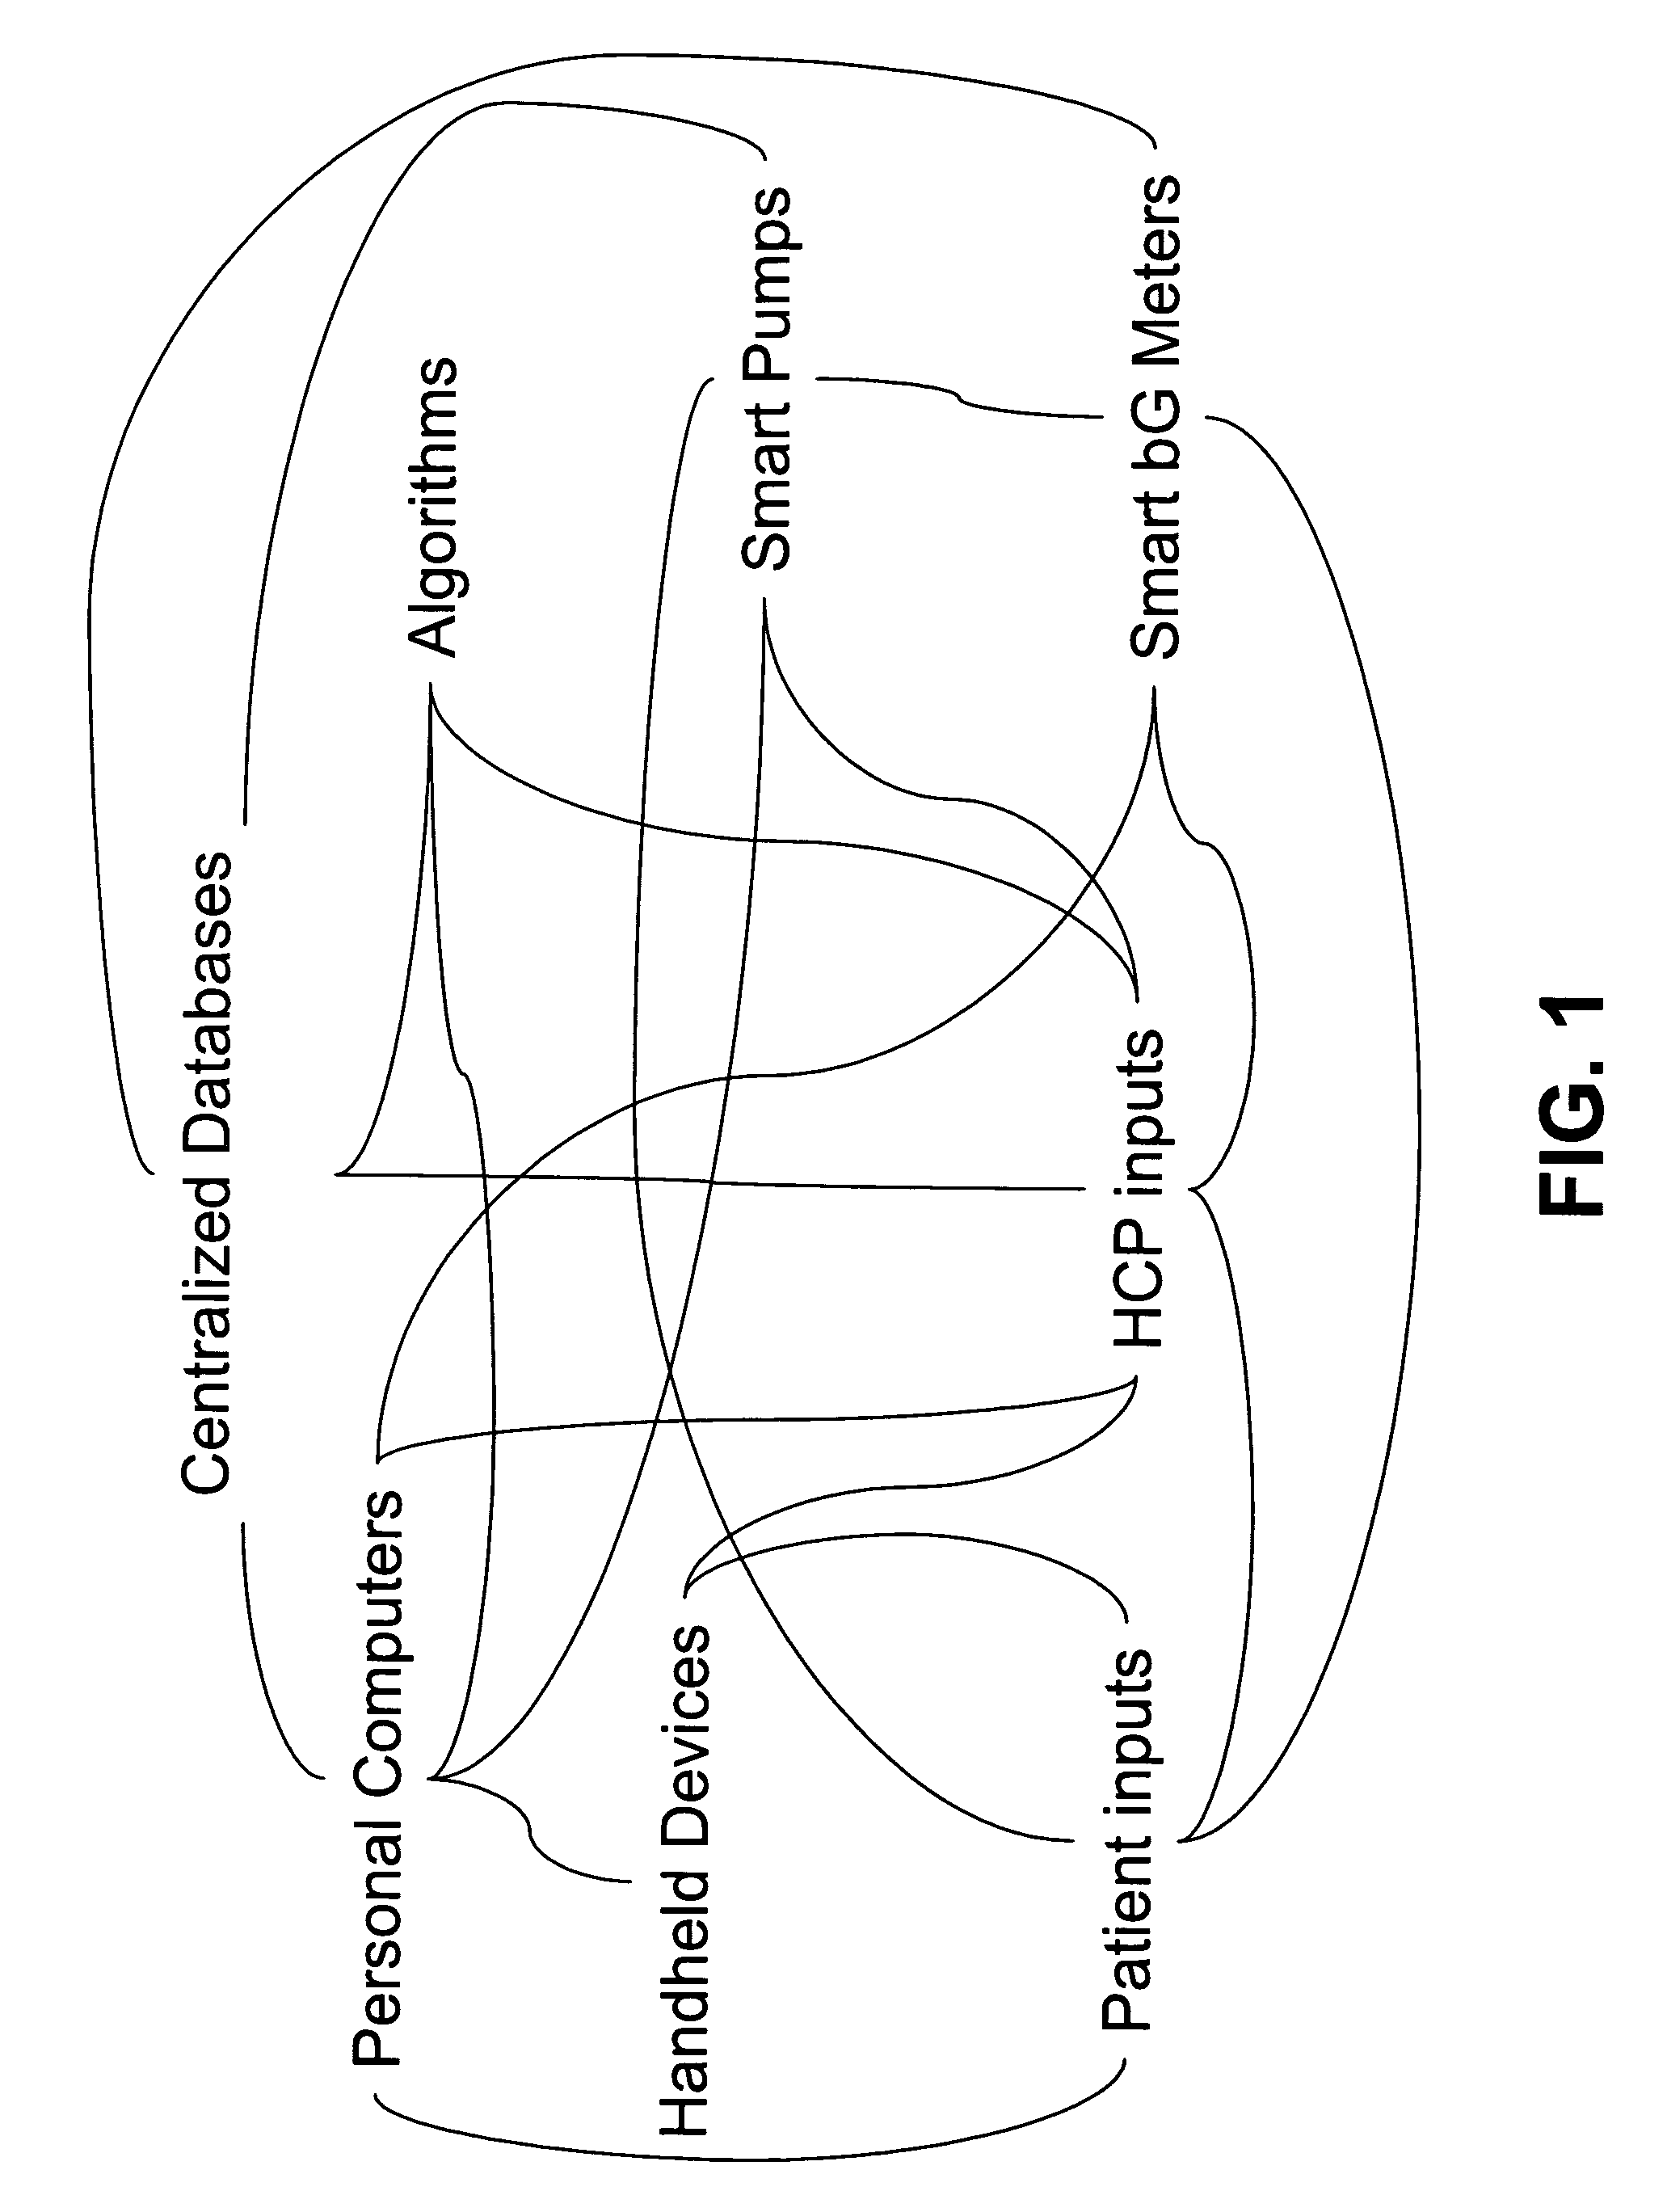 System for developing patient specific therapies based on dynamic modeling of patient physiology and method thereof